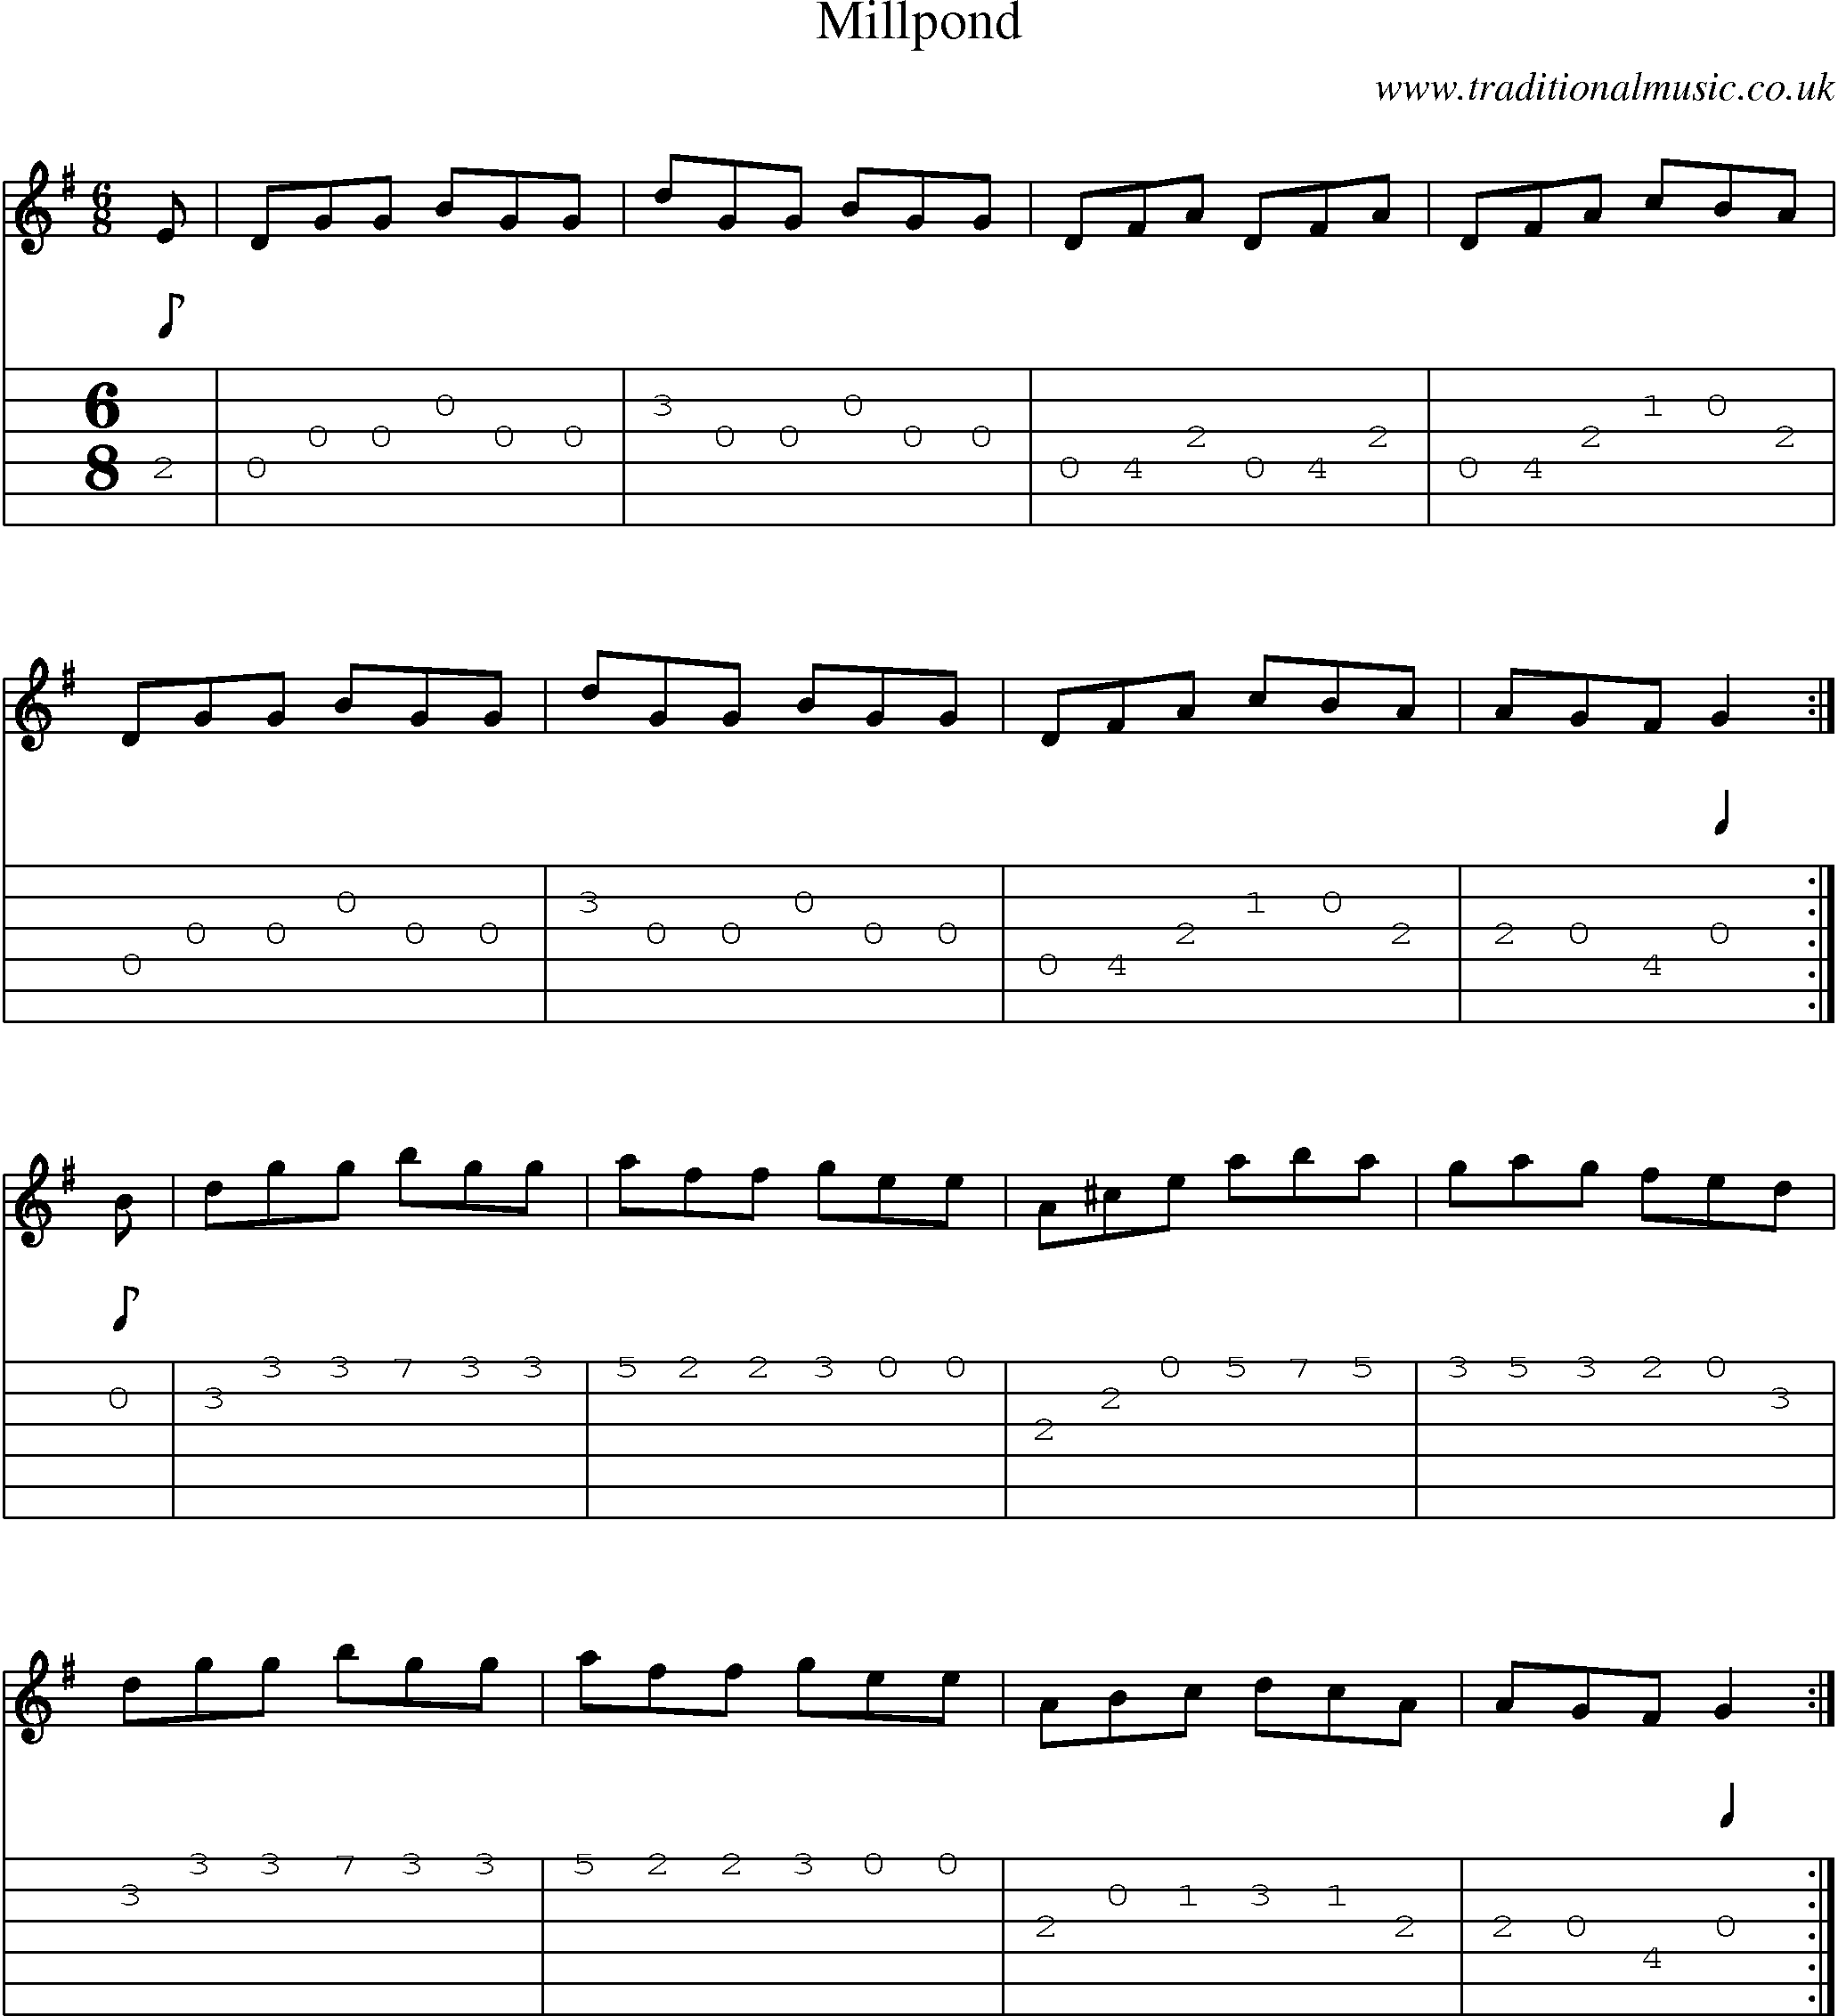 Music Score and Guitar Tabs for Millpond